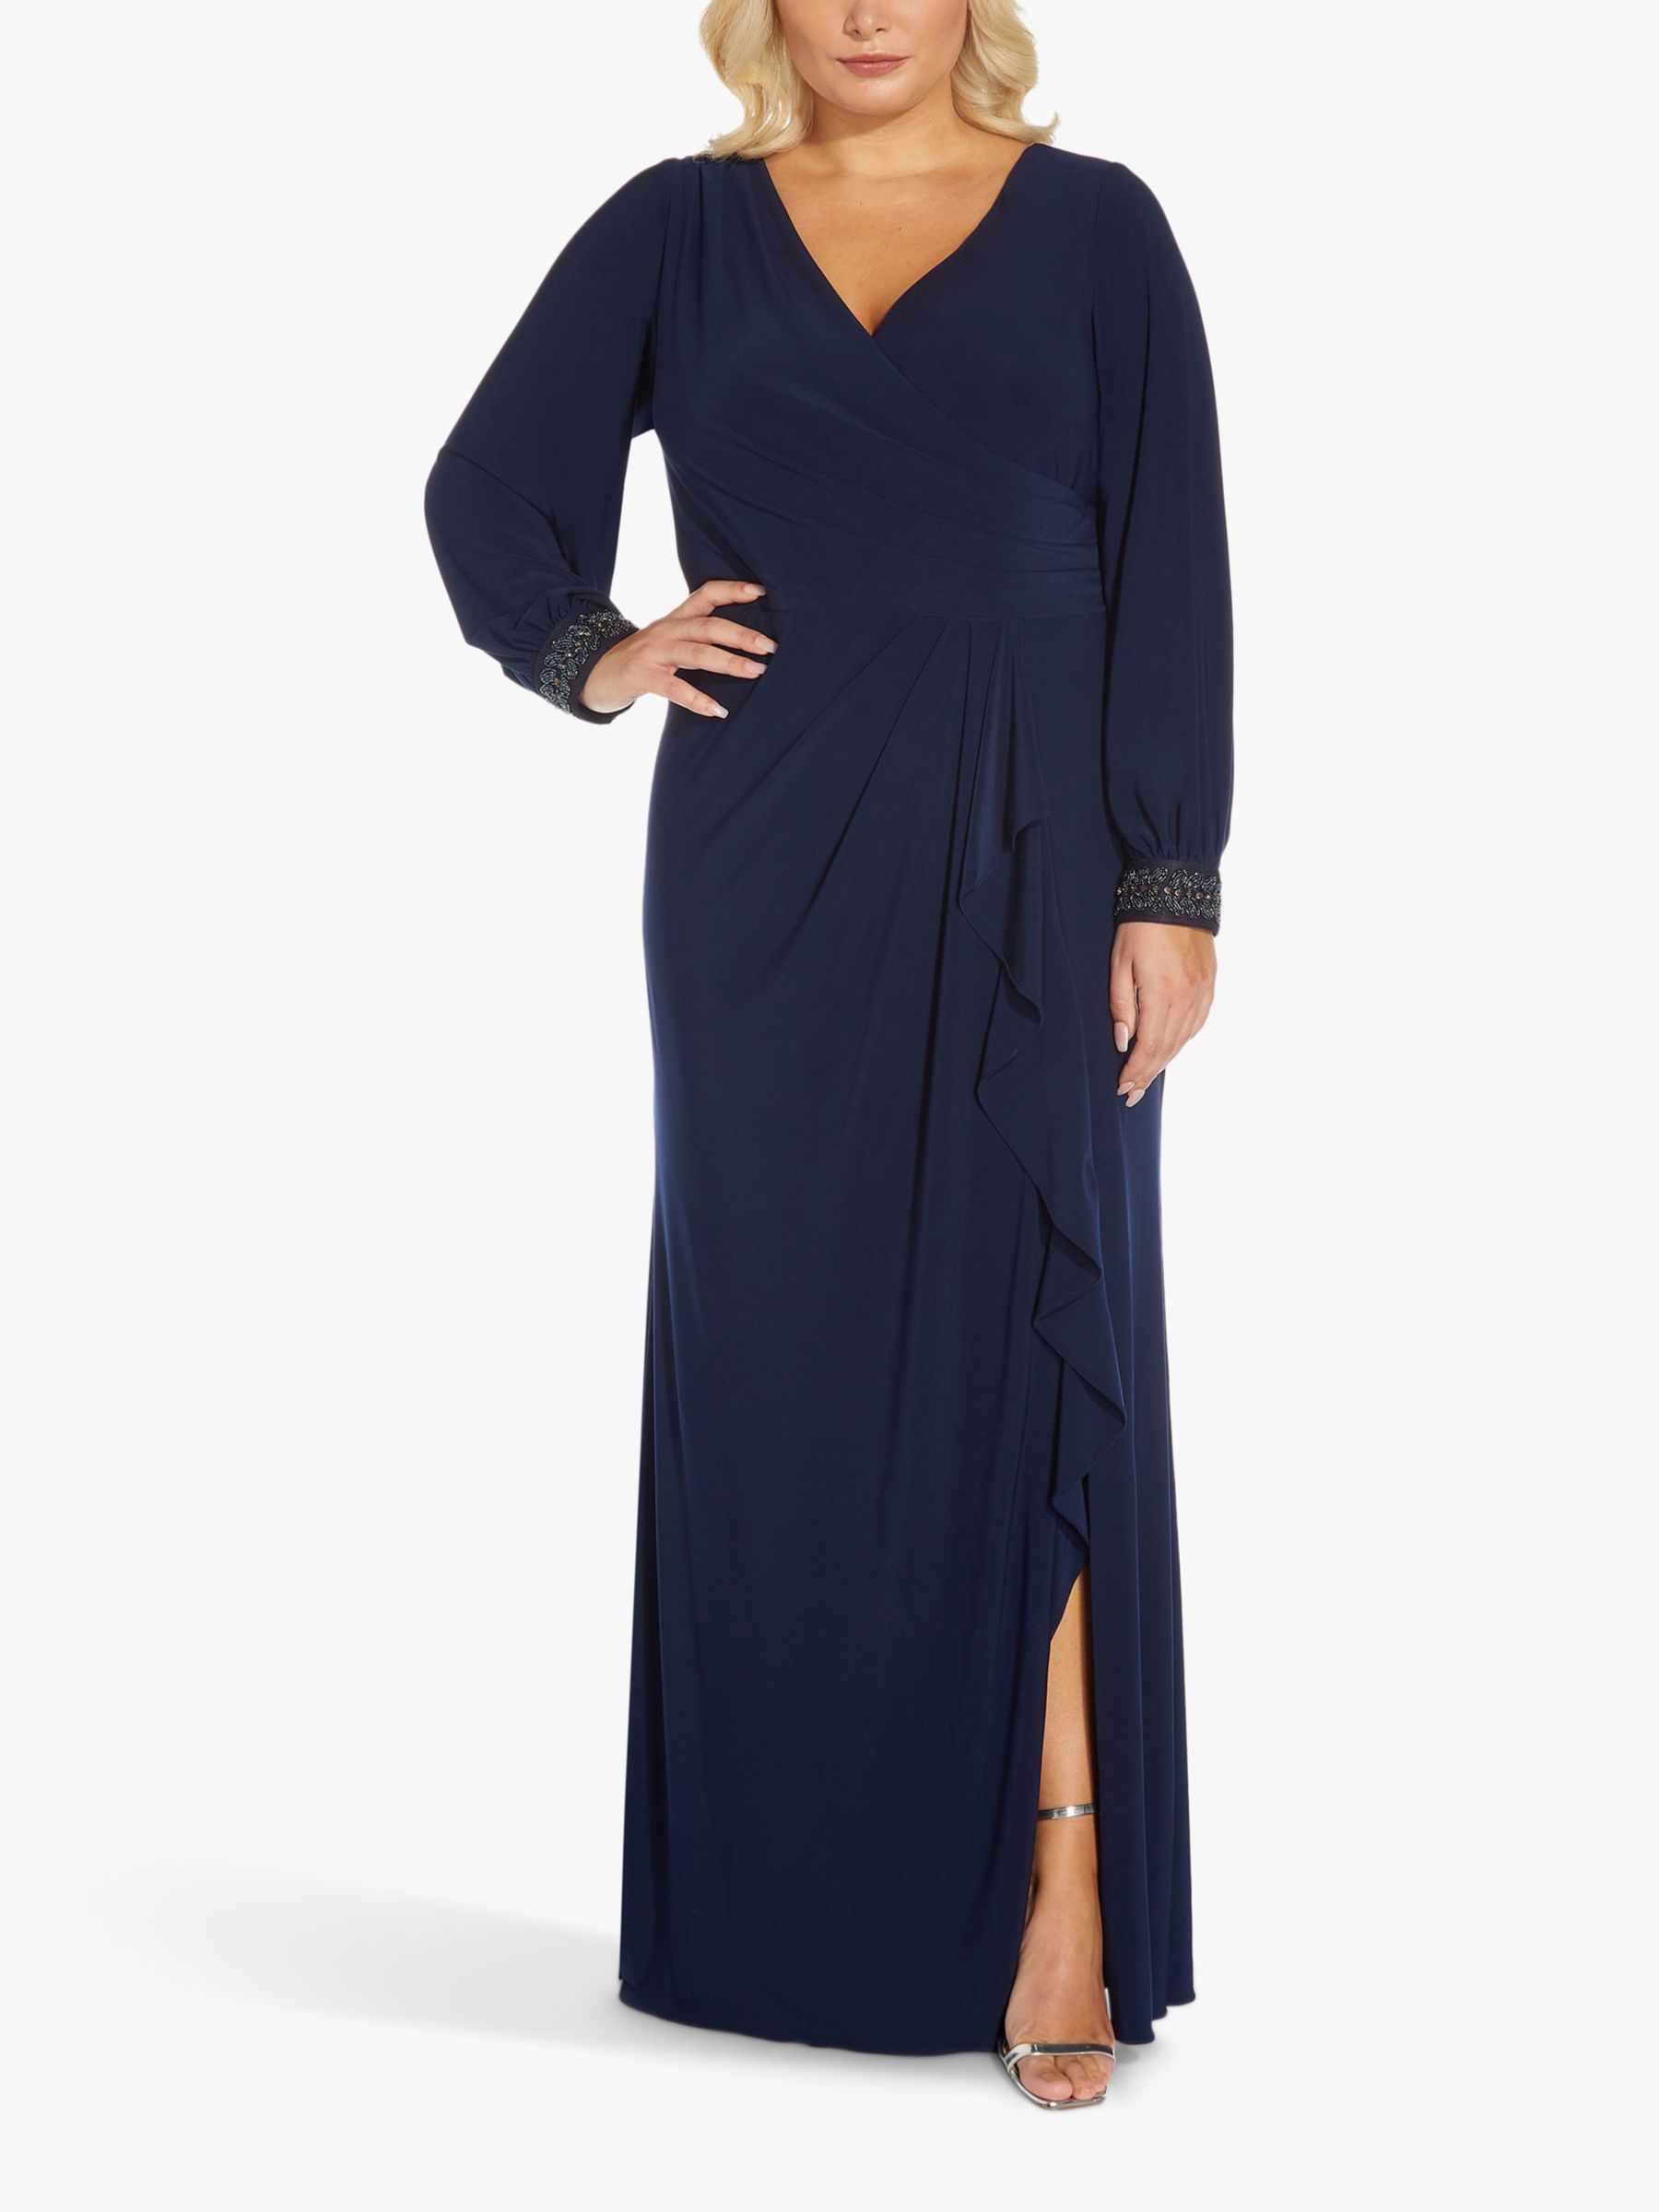 marionet Blinke Tolkning Adrianna Papell Plus Size Beaded Gown, Midnight at John Lewis & Partners